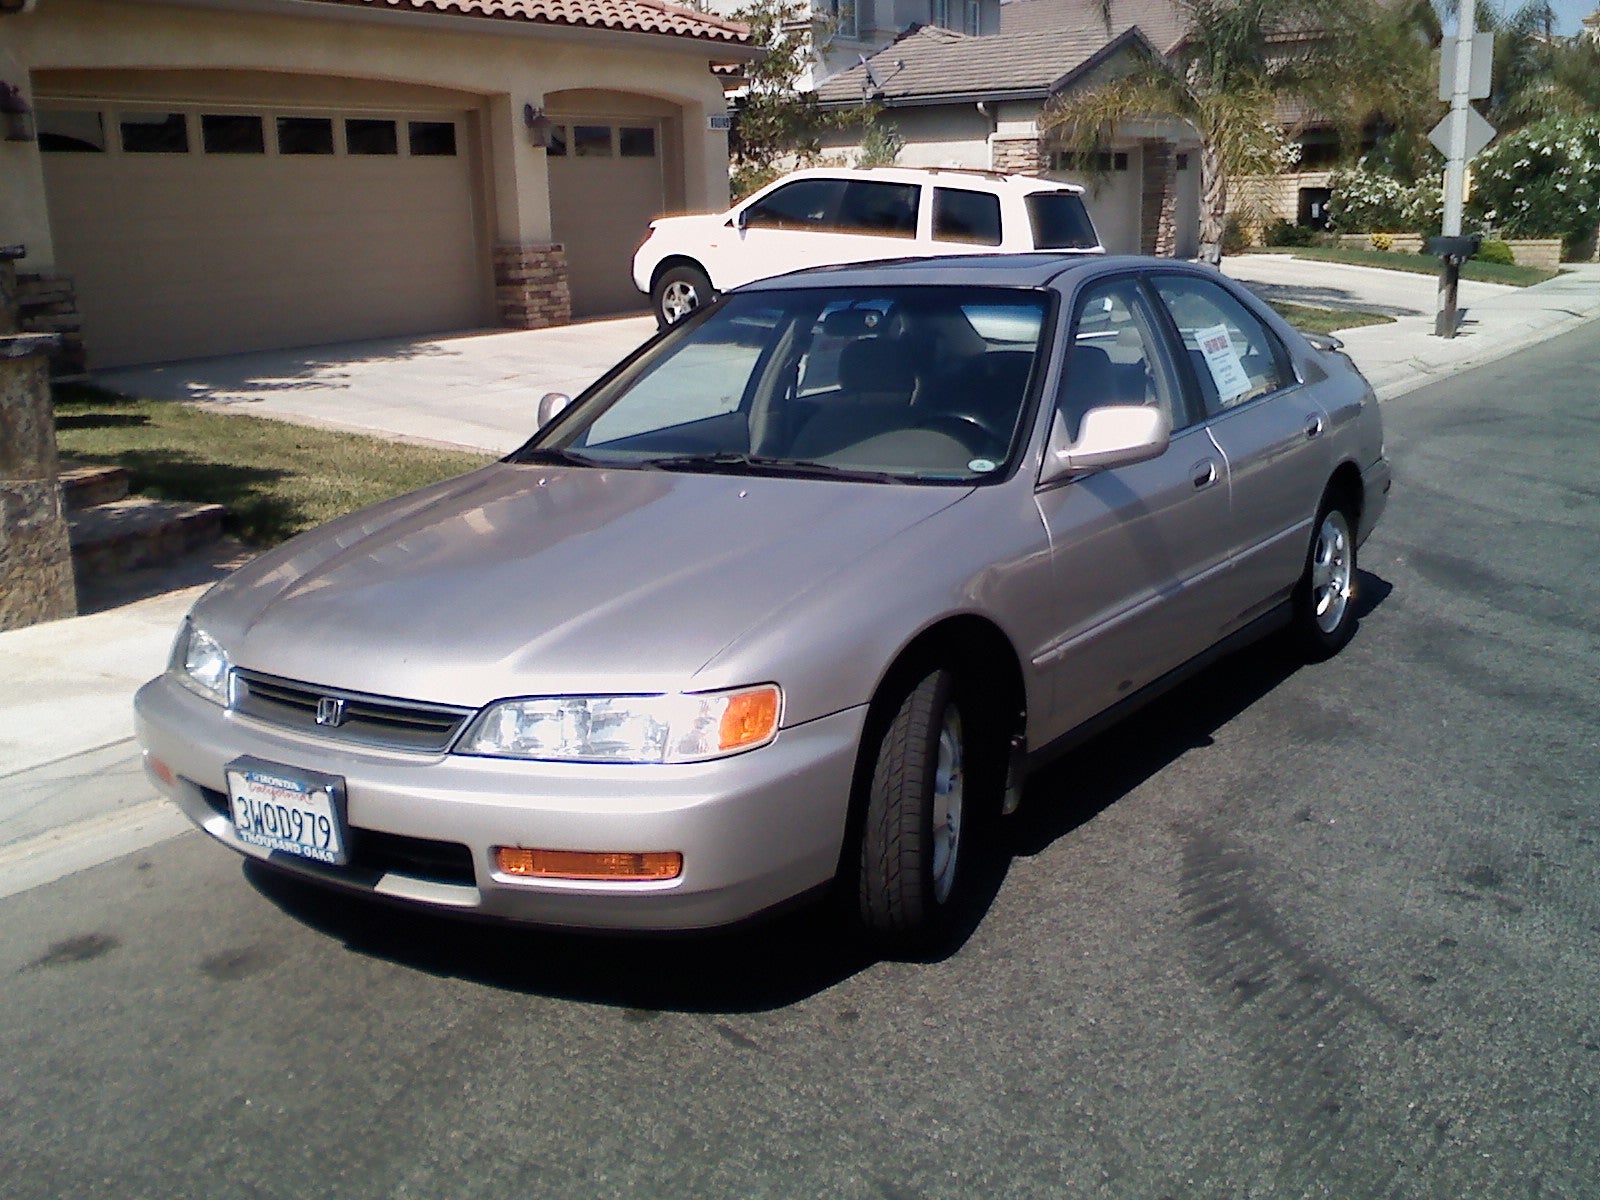 Interested to see how the 1997 honda accord ranks against similar cars in t...